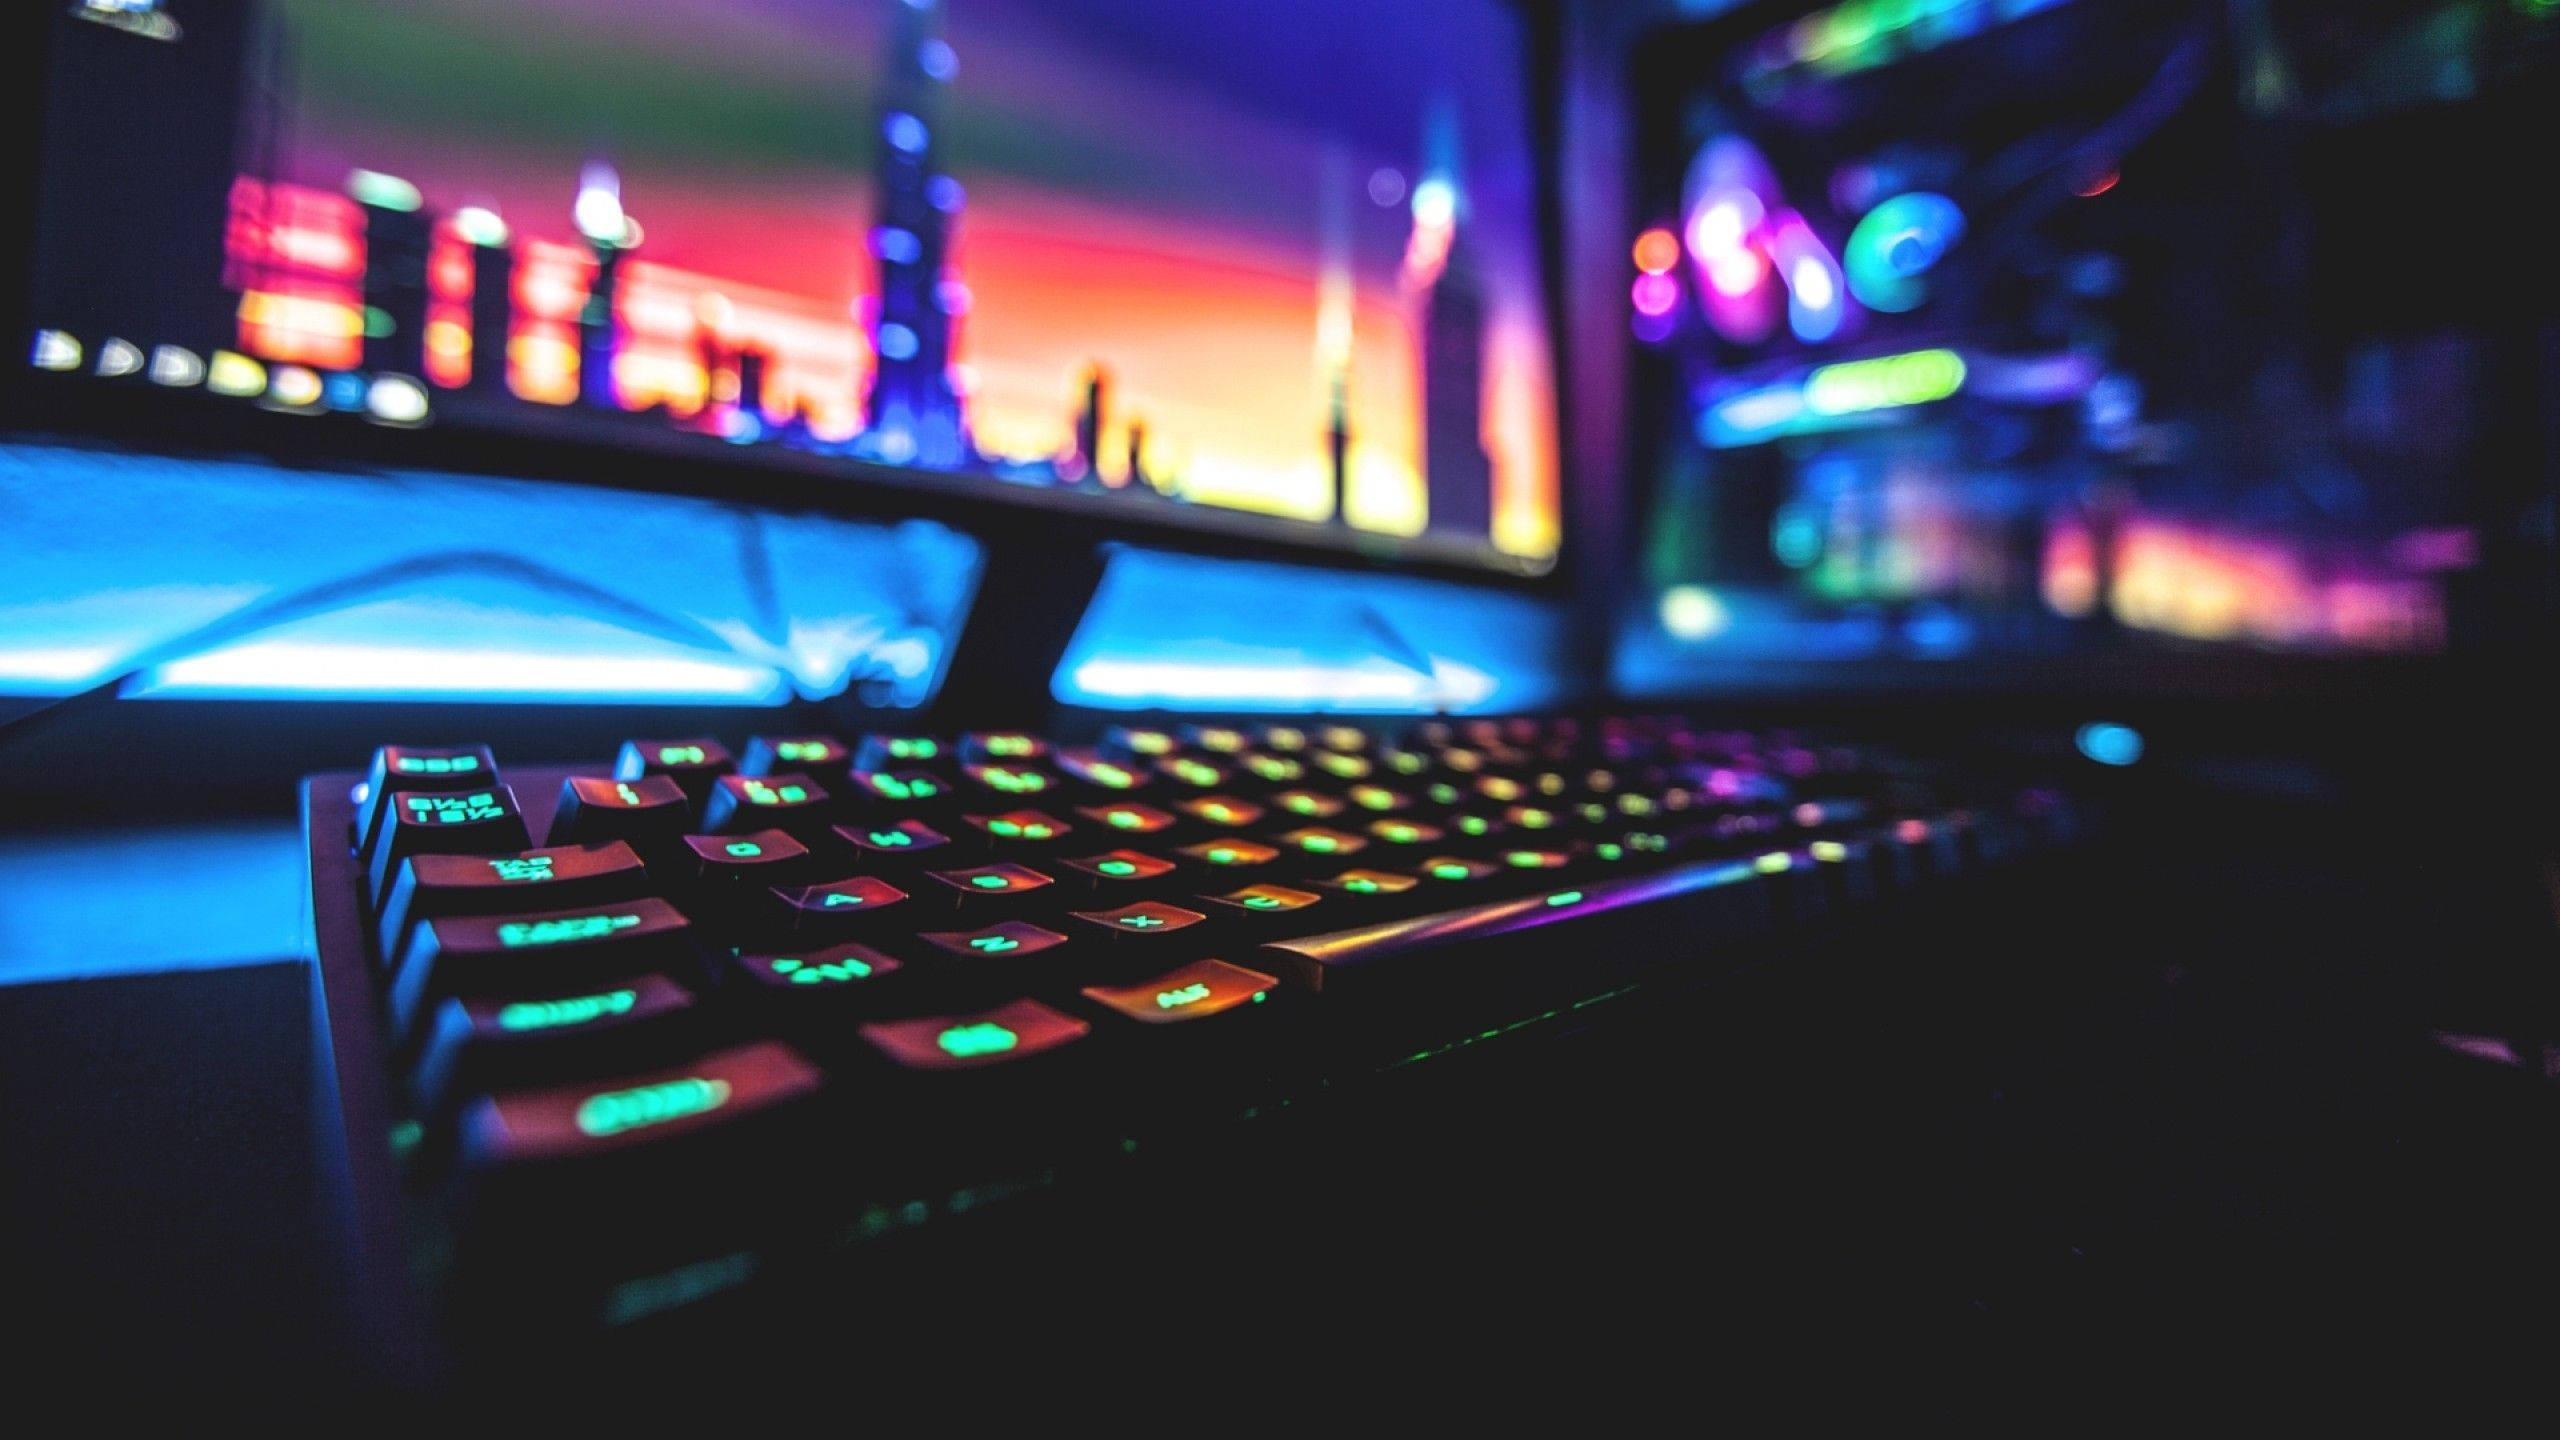 100+] Keyboard Aesthetic Wallpapers for FREE 